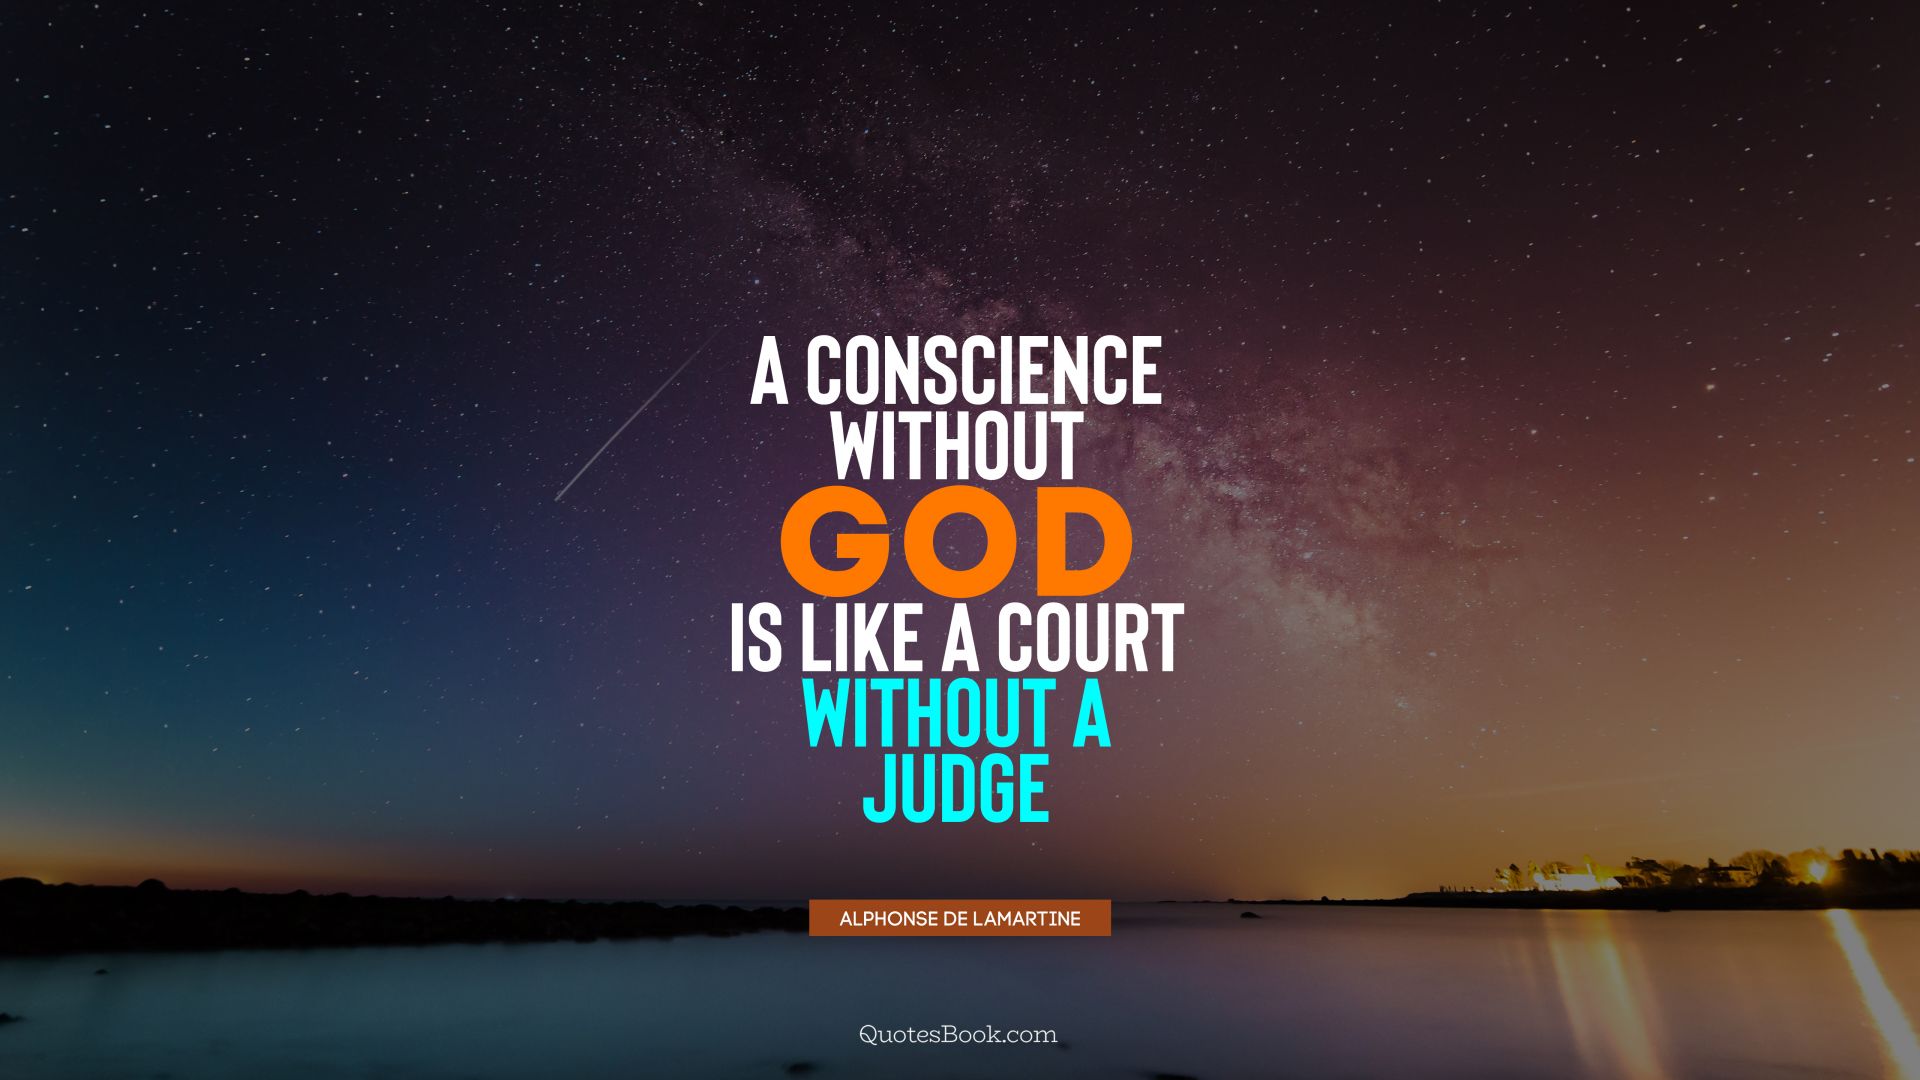 A conscience without God is like a court without a judge. - Quote by Alphonse de Lamartine